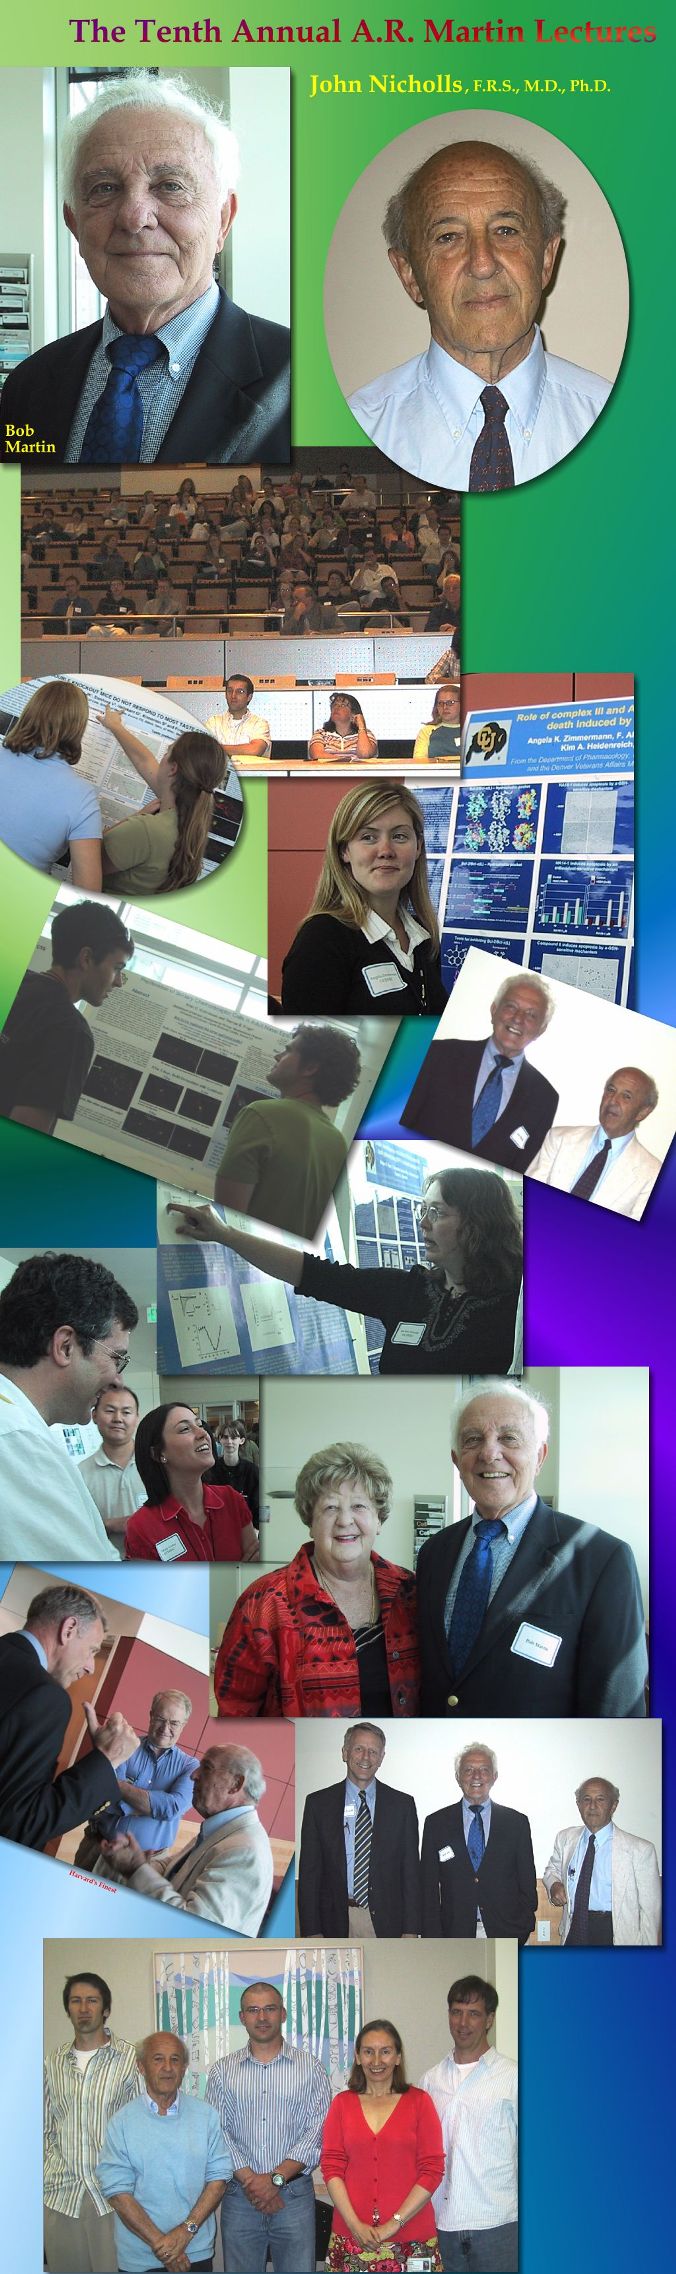 Photo collage from 2005 A R Martin Lecture